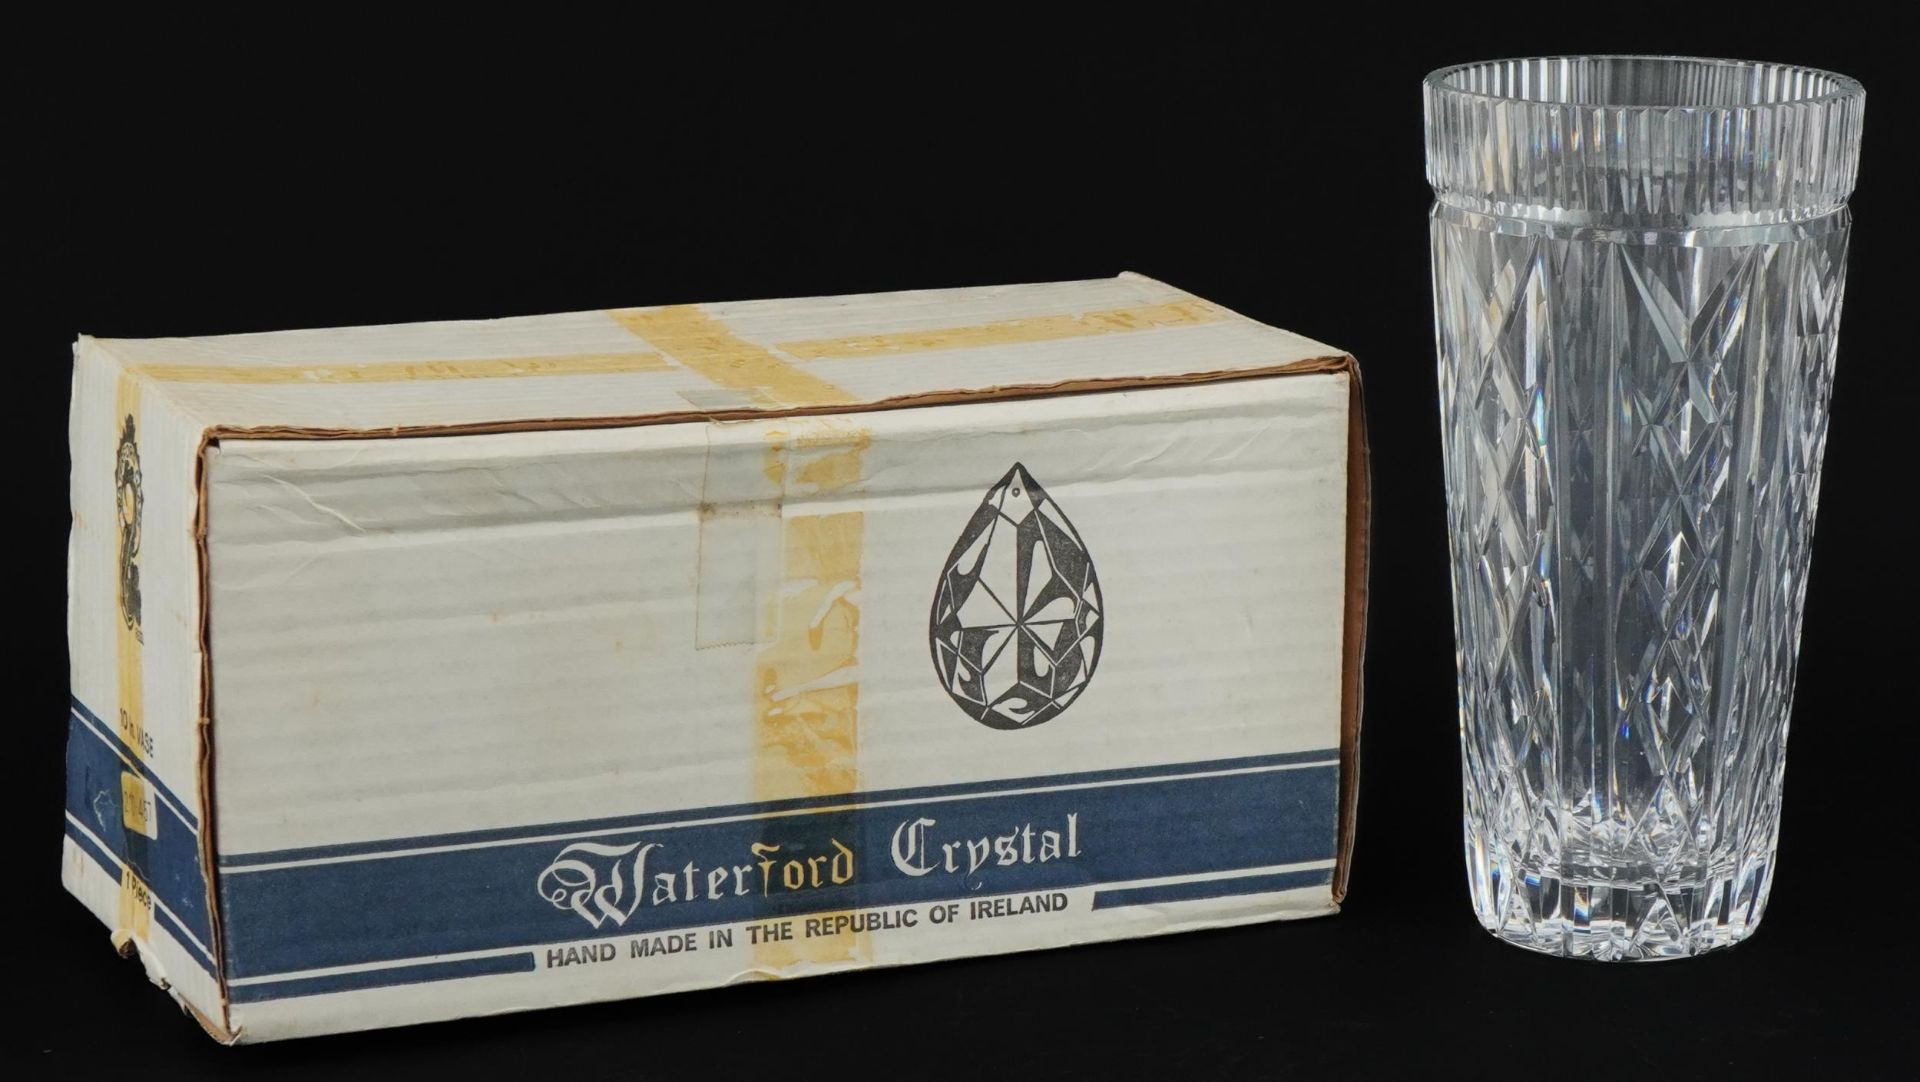 Waterford Crystal vase with box, 20.5cm high : For further information on this lot please visit